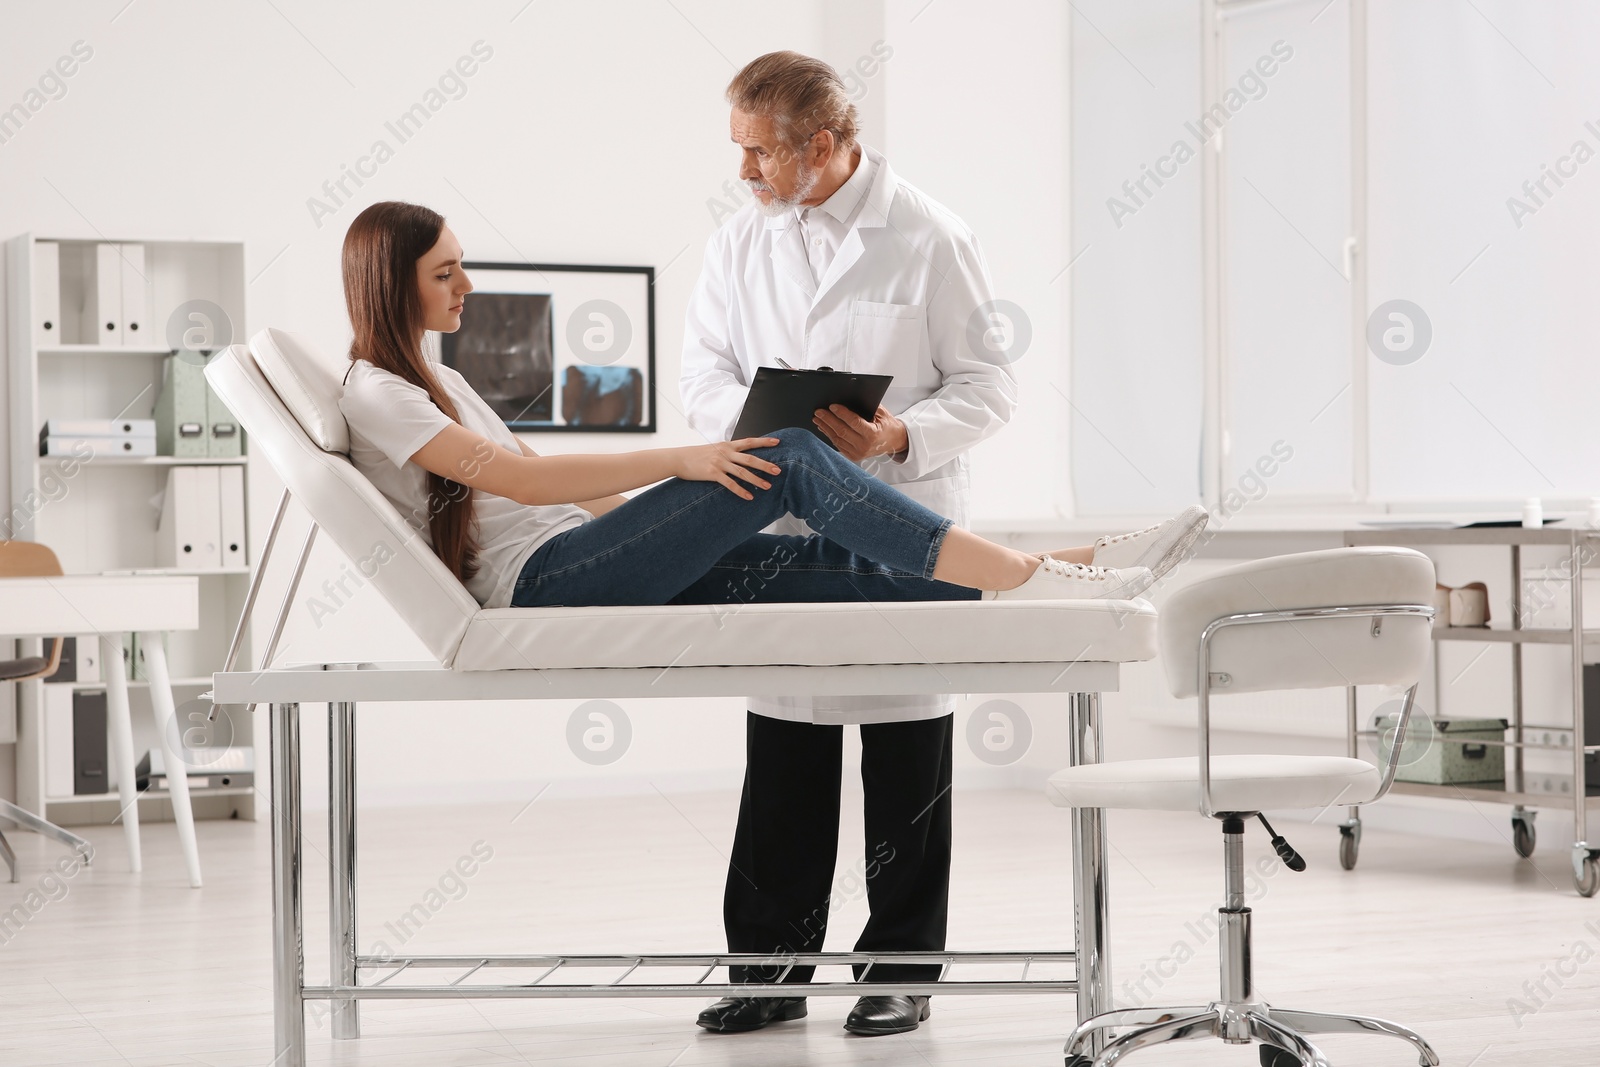 Photo of Orthopedist examining patient with injured knee in clinic